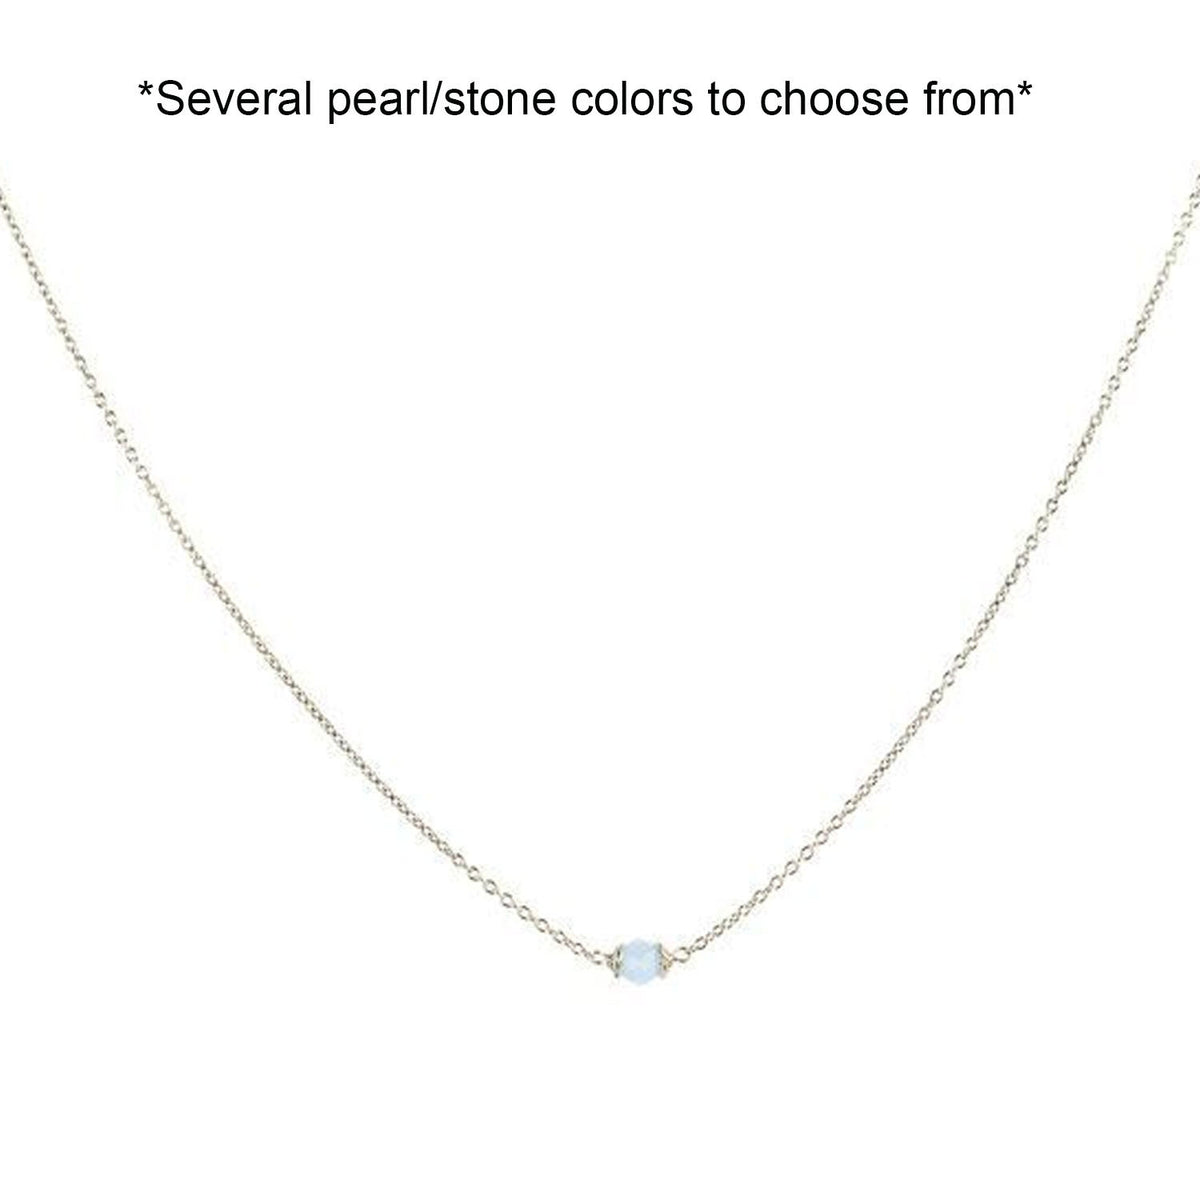 Lenny and Eva Trousseau silver necklace in cornflower. Several colors to choose from.